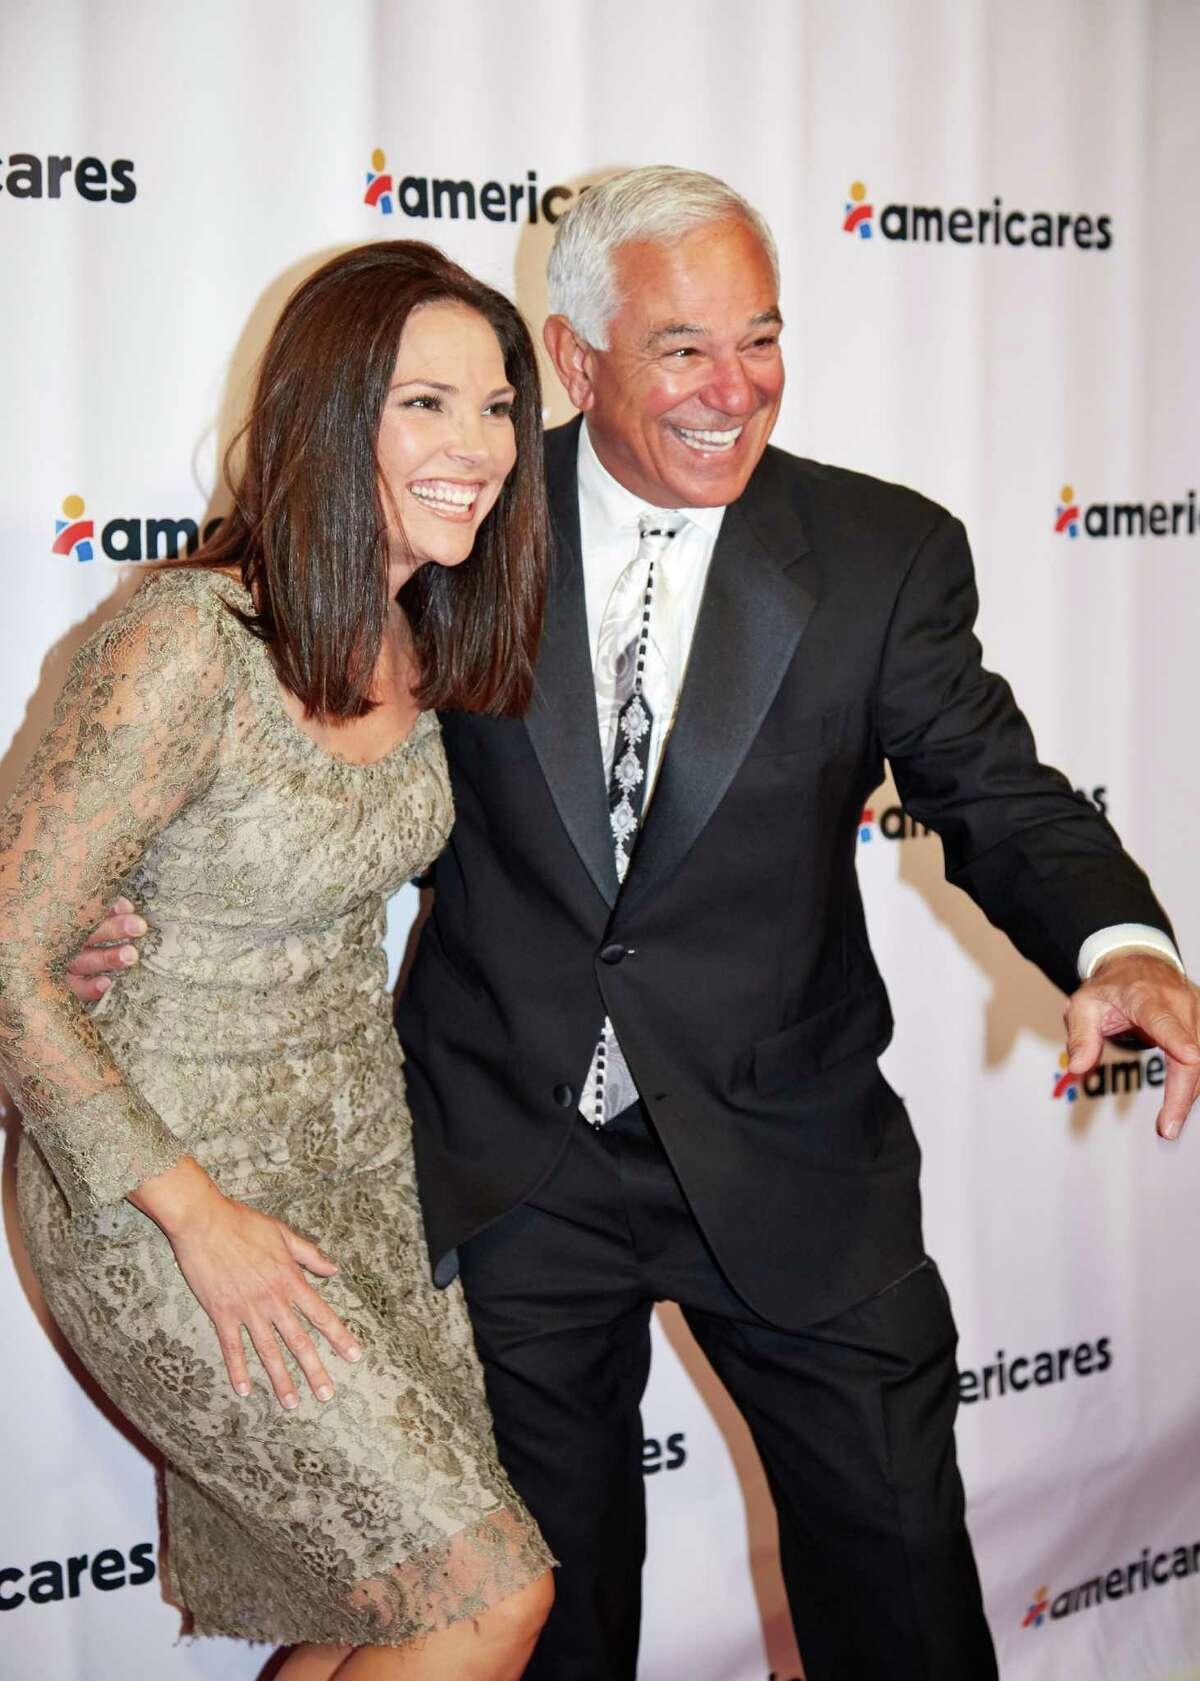 Erica Hill, host of HLN’s “On the Story with Erica Hill,” and Bobby Valentine at Americares’ Airlift Benefit.